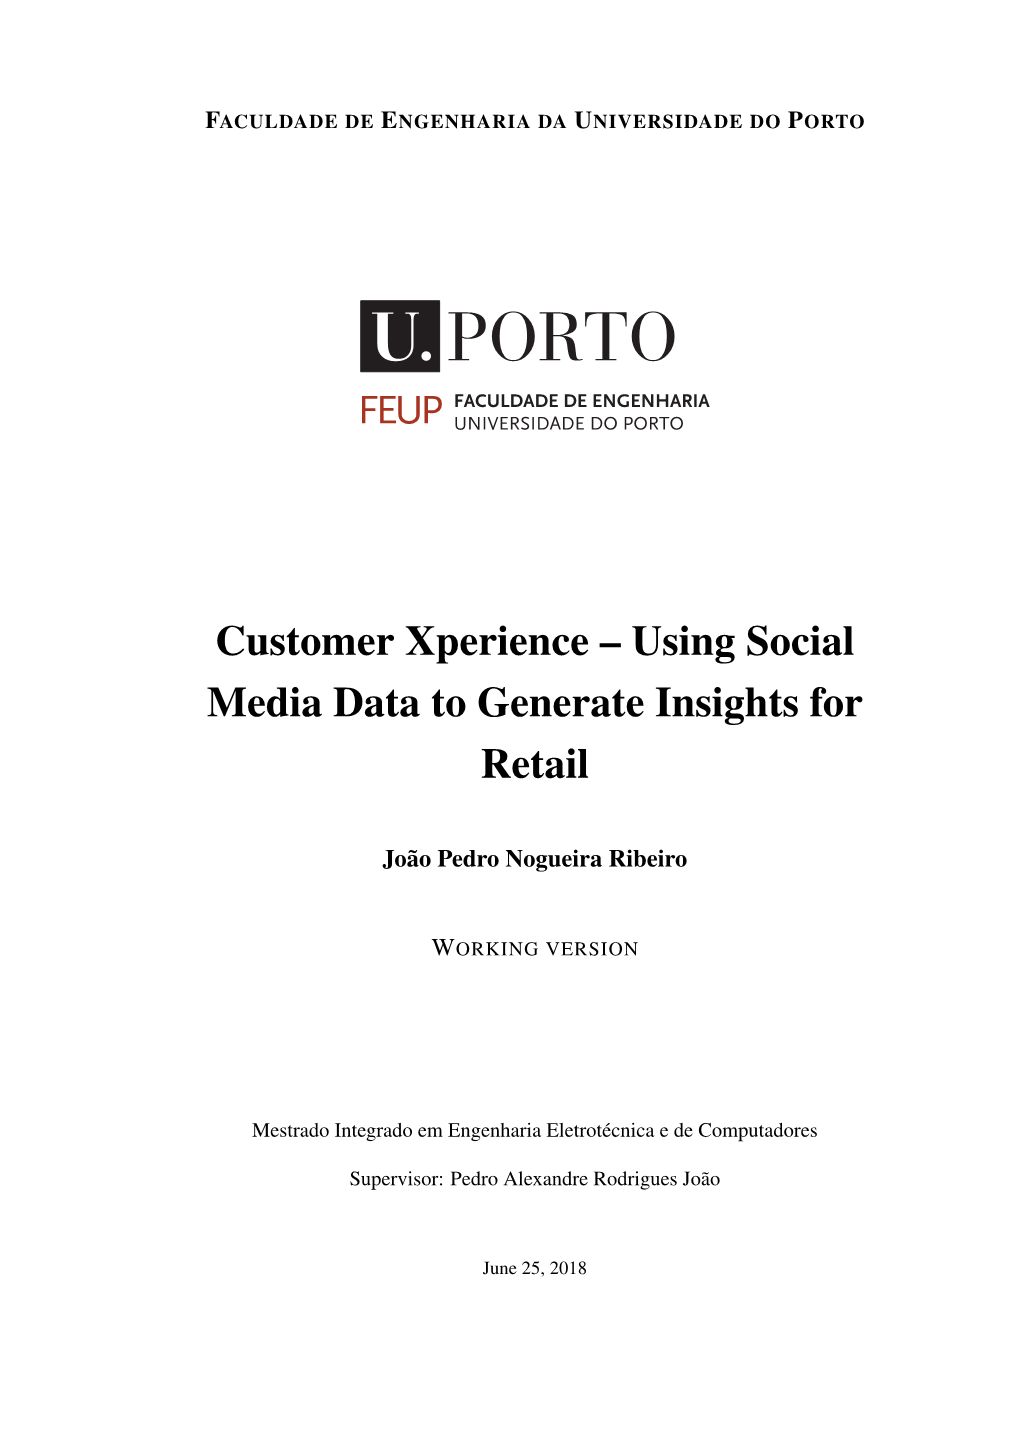 Customer Xperience – Using Social Media Data to Generate Insights for Retail